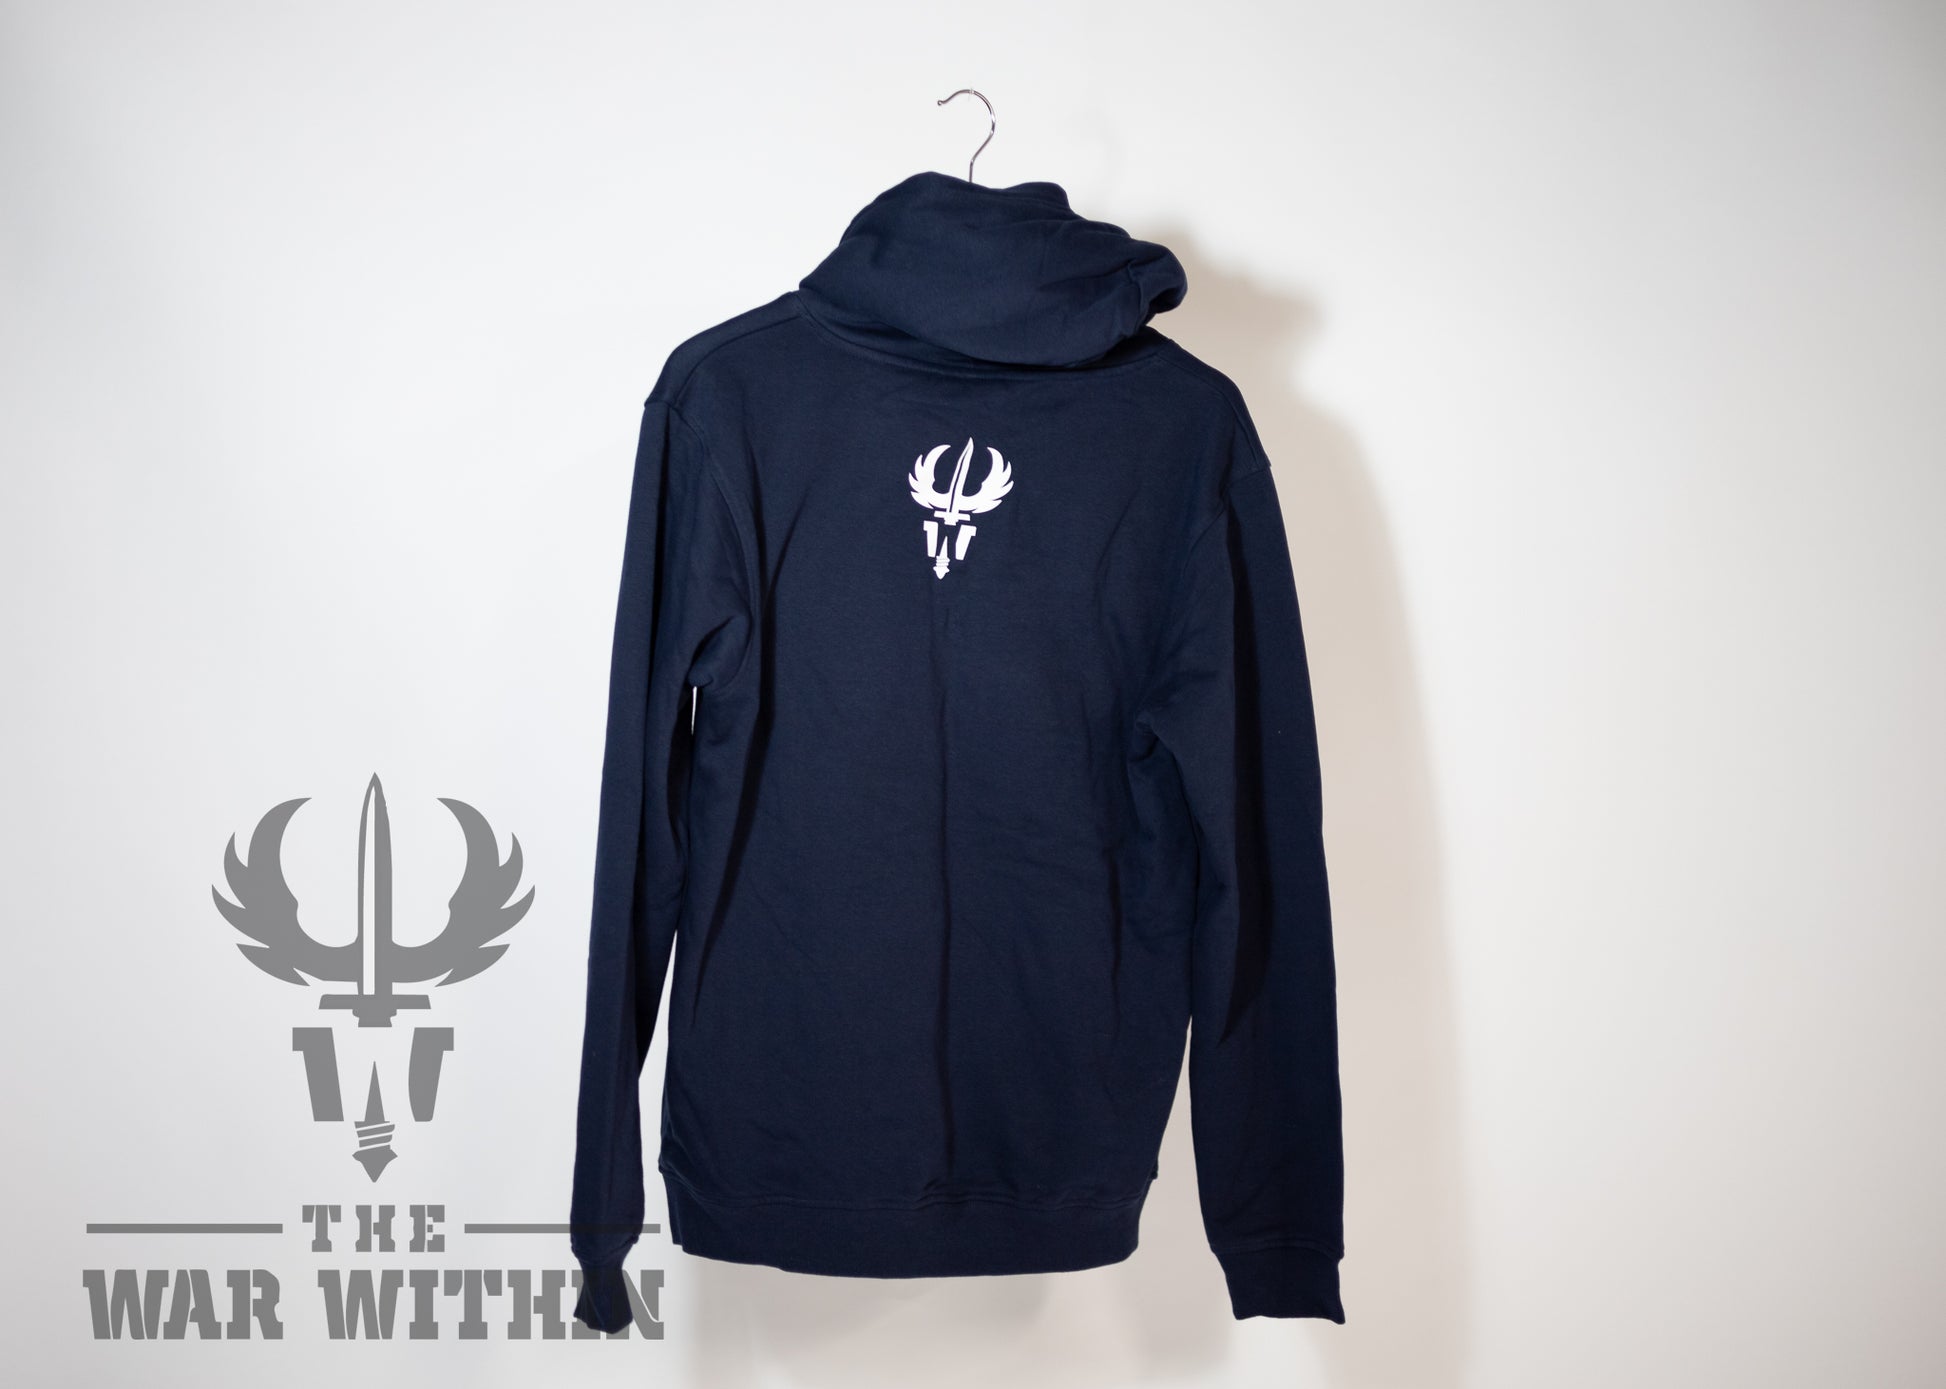 We all have heavy days, sometimes it is a question to remember that we are not alone on this planet. Jon A. Archambault Author of Operation: Wired Differently and mental health advocate, has put together a curated apparel line to help him on his journey.  Hooded sweater, Navy Blue.